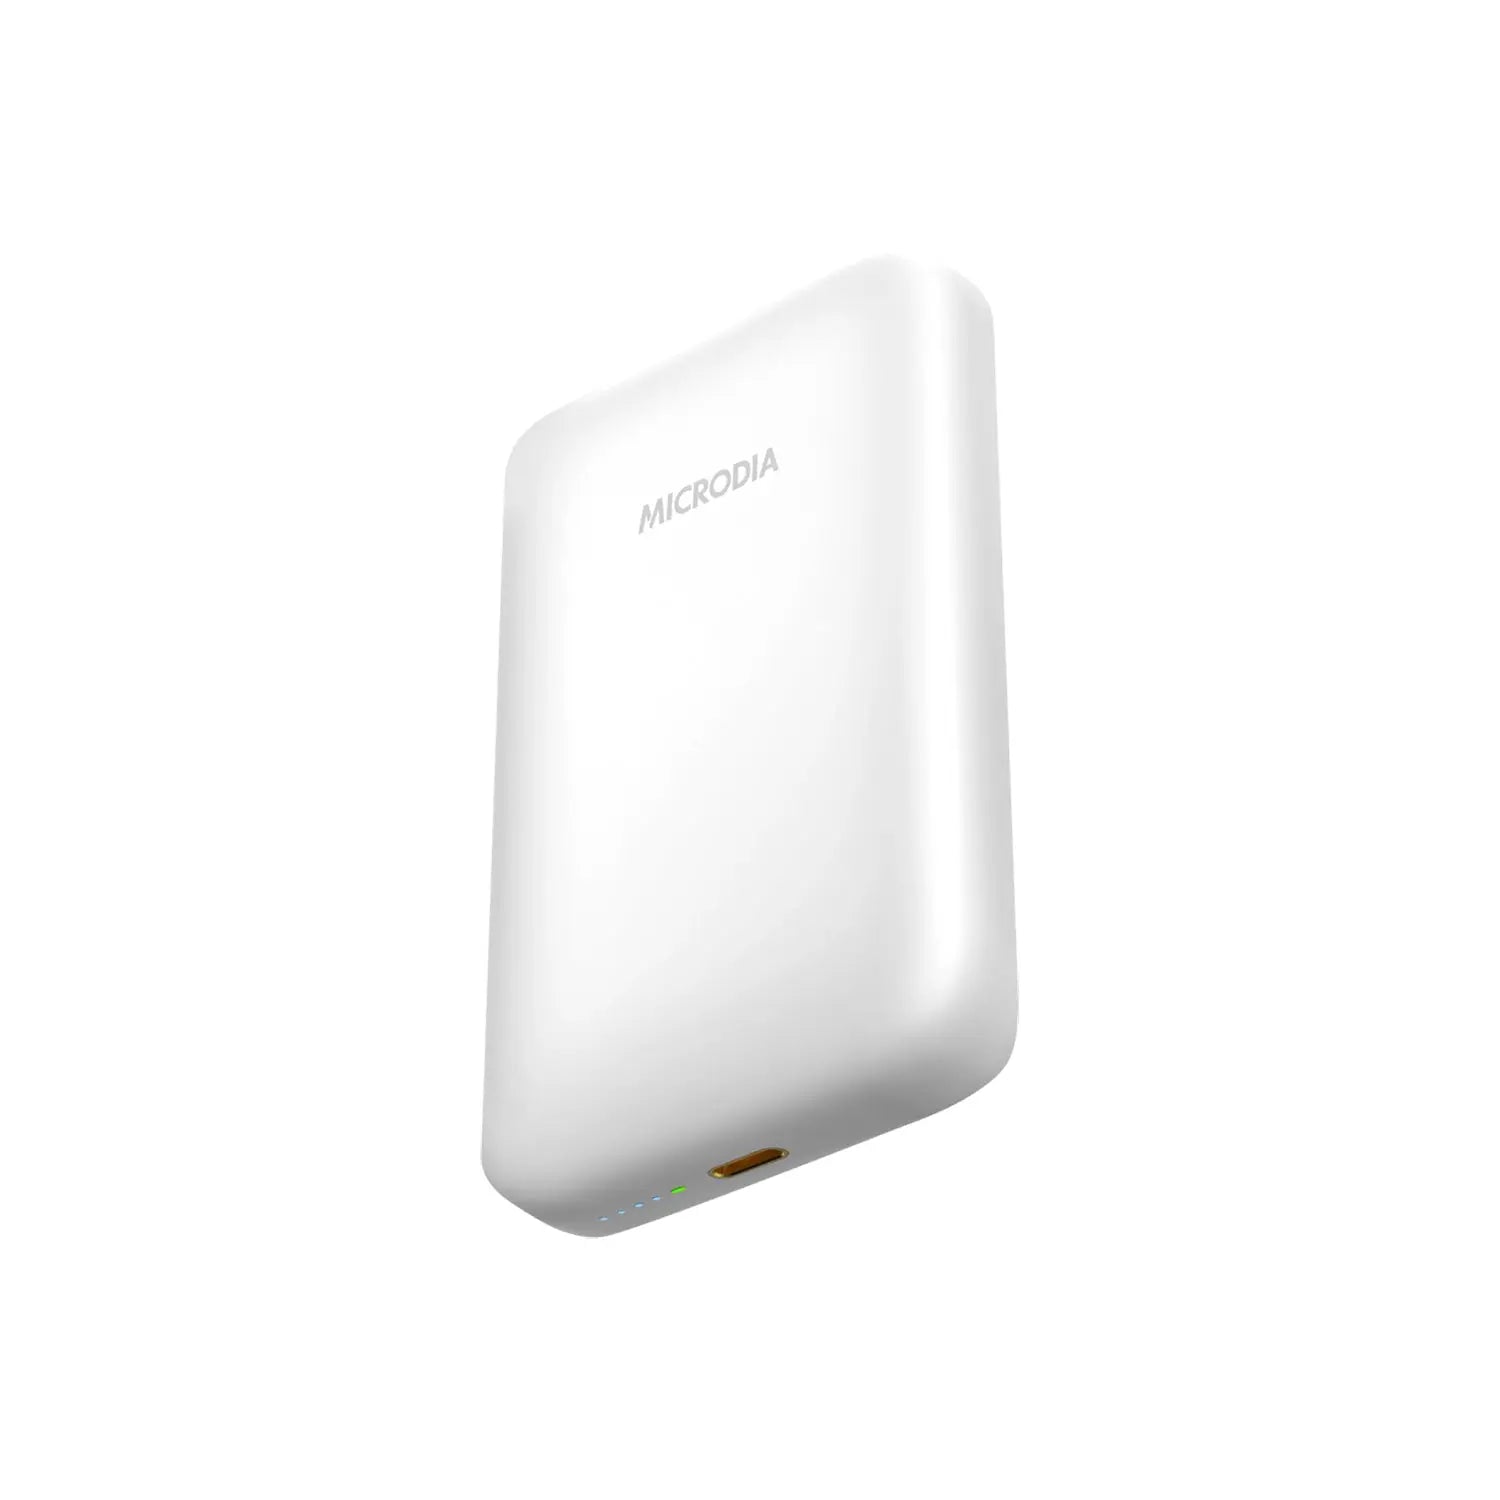 SNAPPower™ Anchor Magnetic Wireless Power Bank 10000mAh.